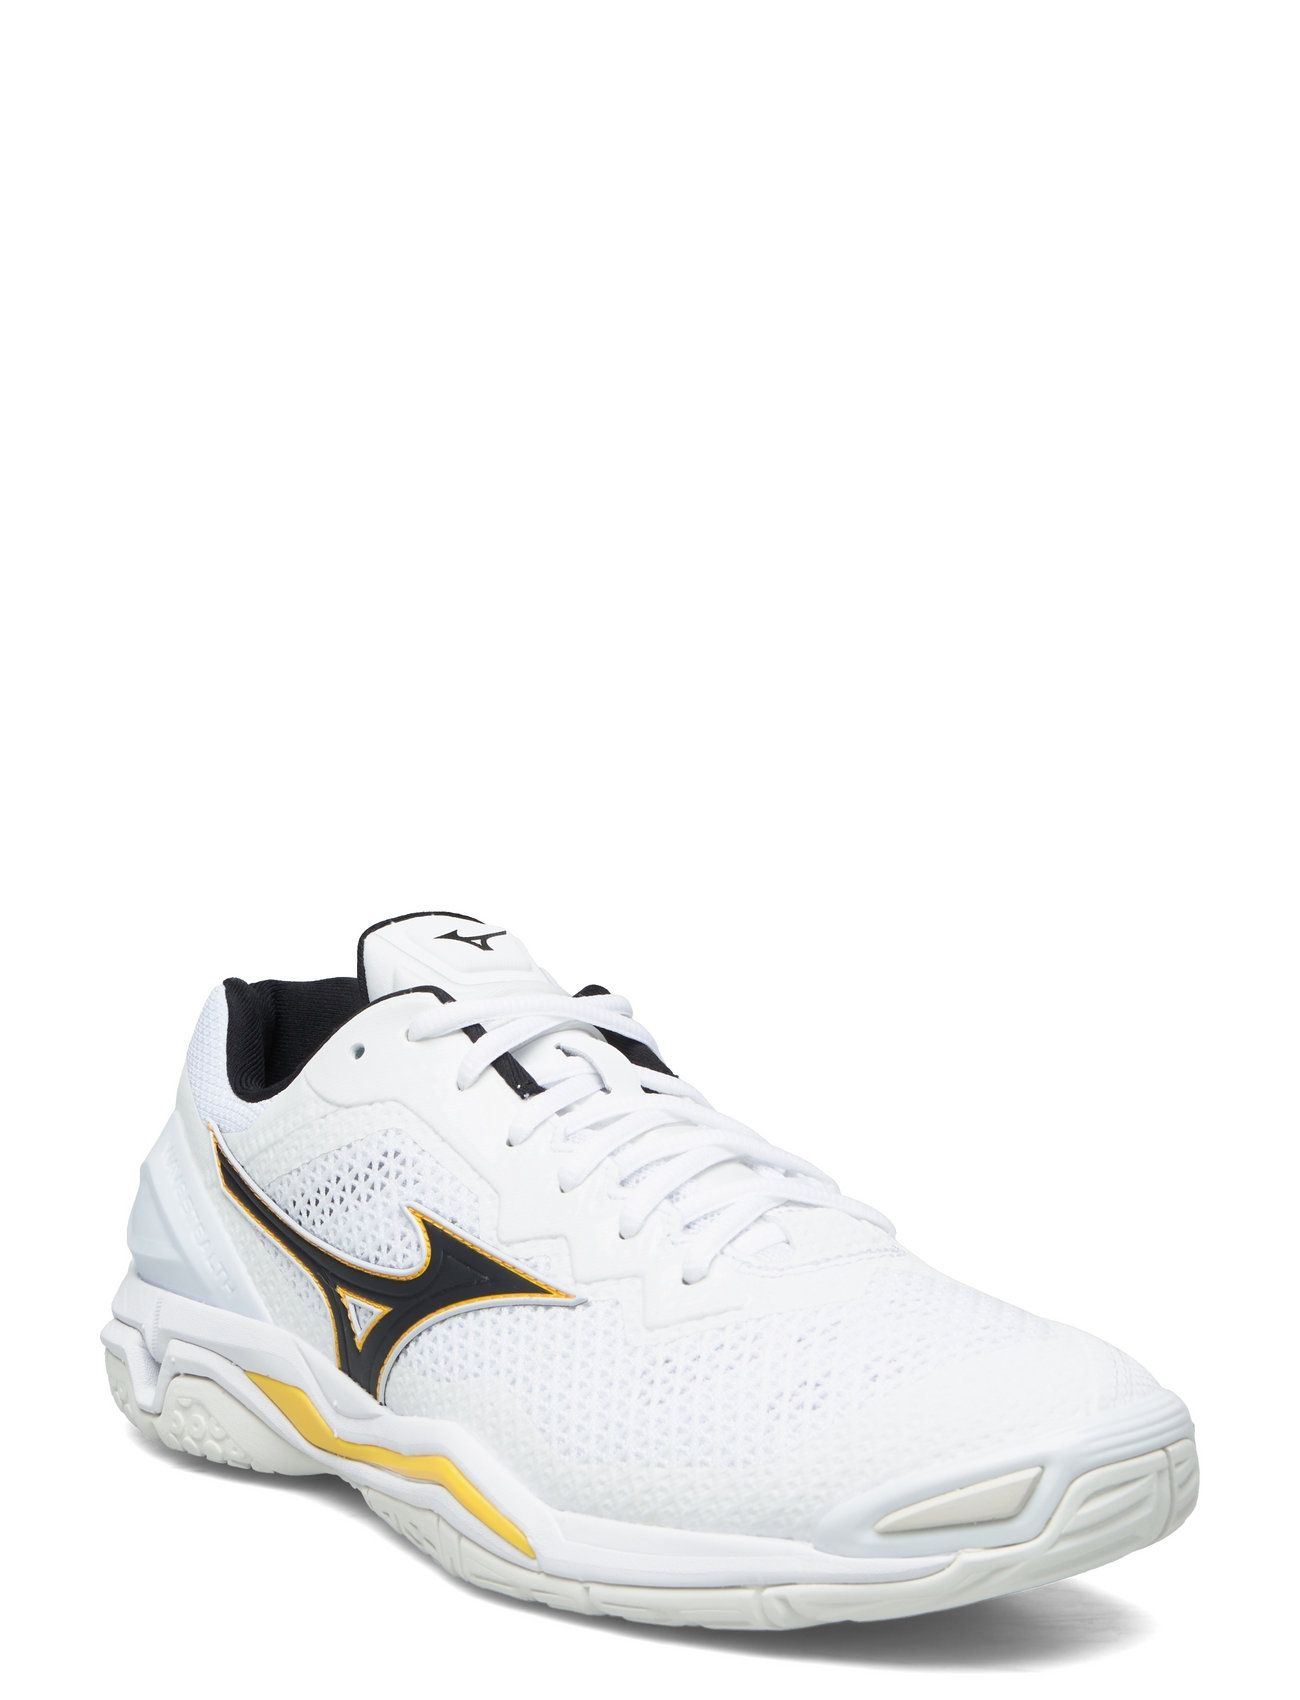 Wave Stealth V Sport Sport Shoes Indoor Sports Shoes White Mizuno